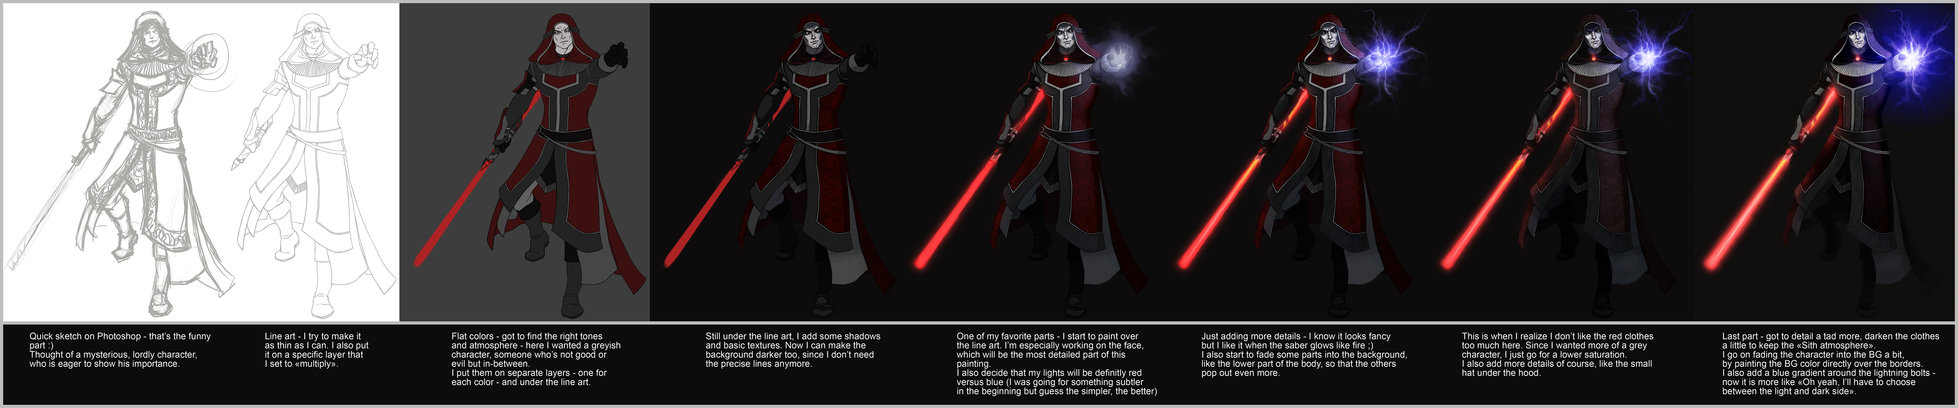 Sith Inquisitor 2 steps by Dolmheon on